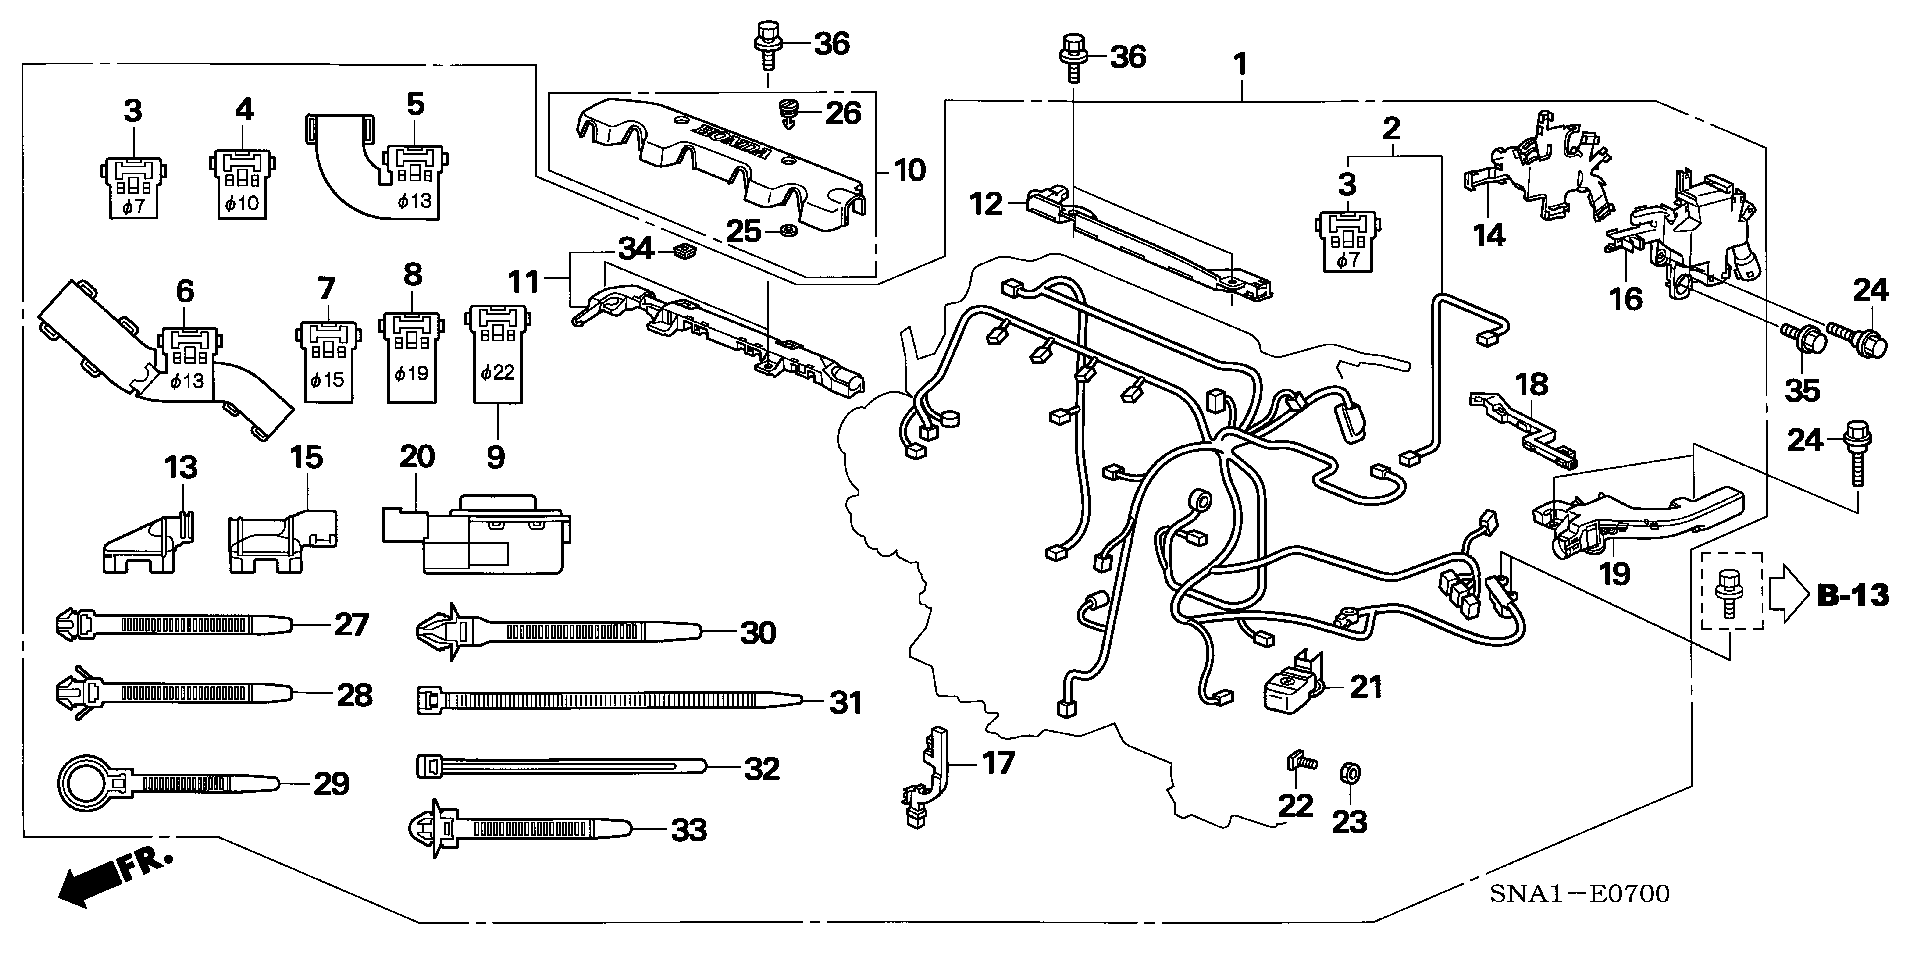 ENGINE WIRE HARNESS (1.8L)